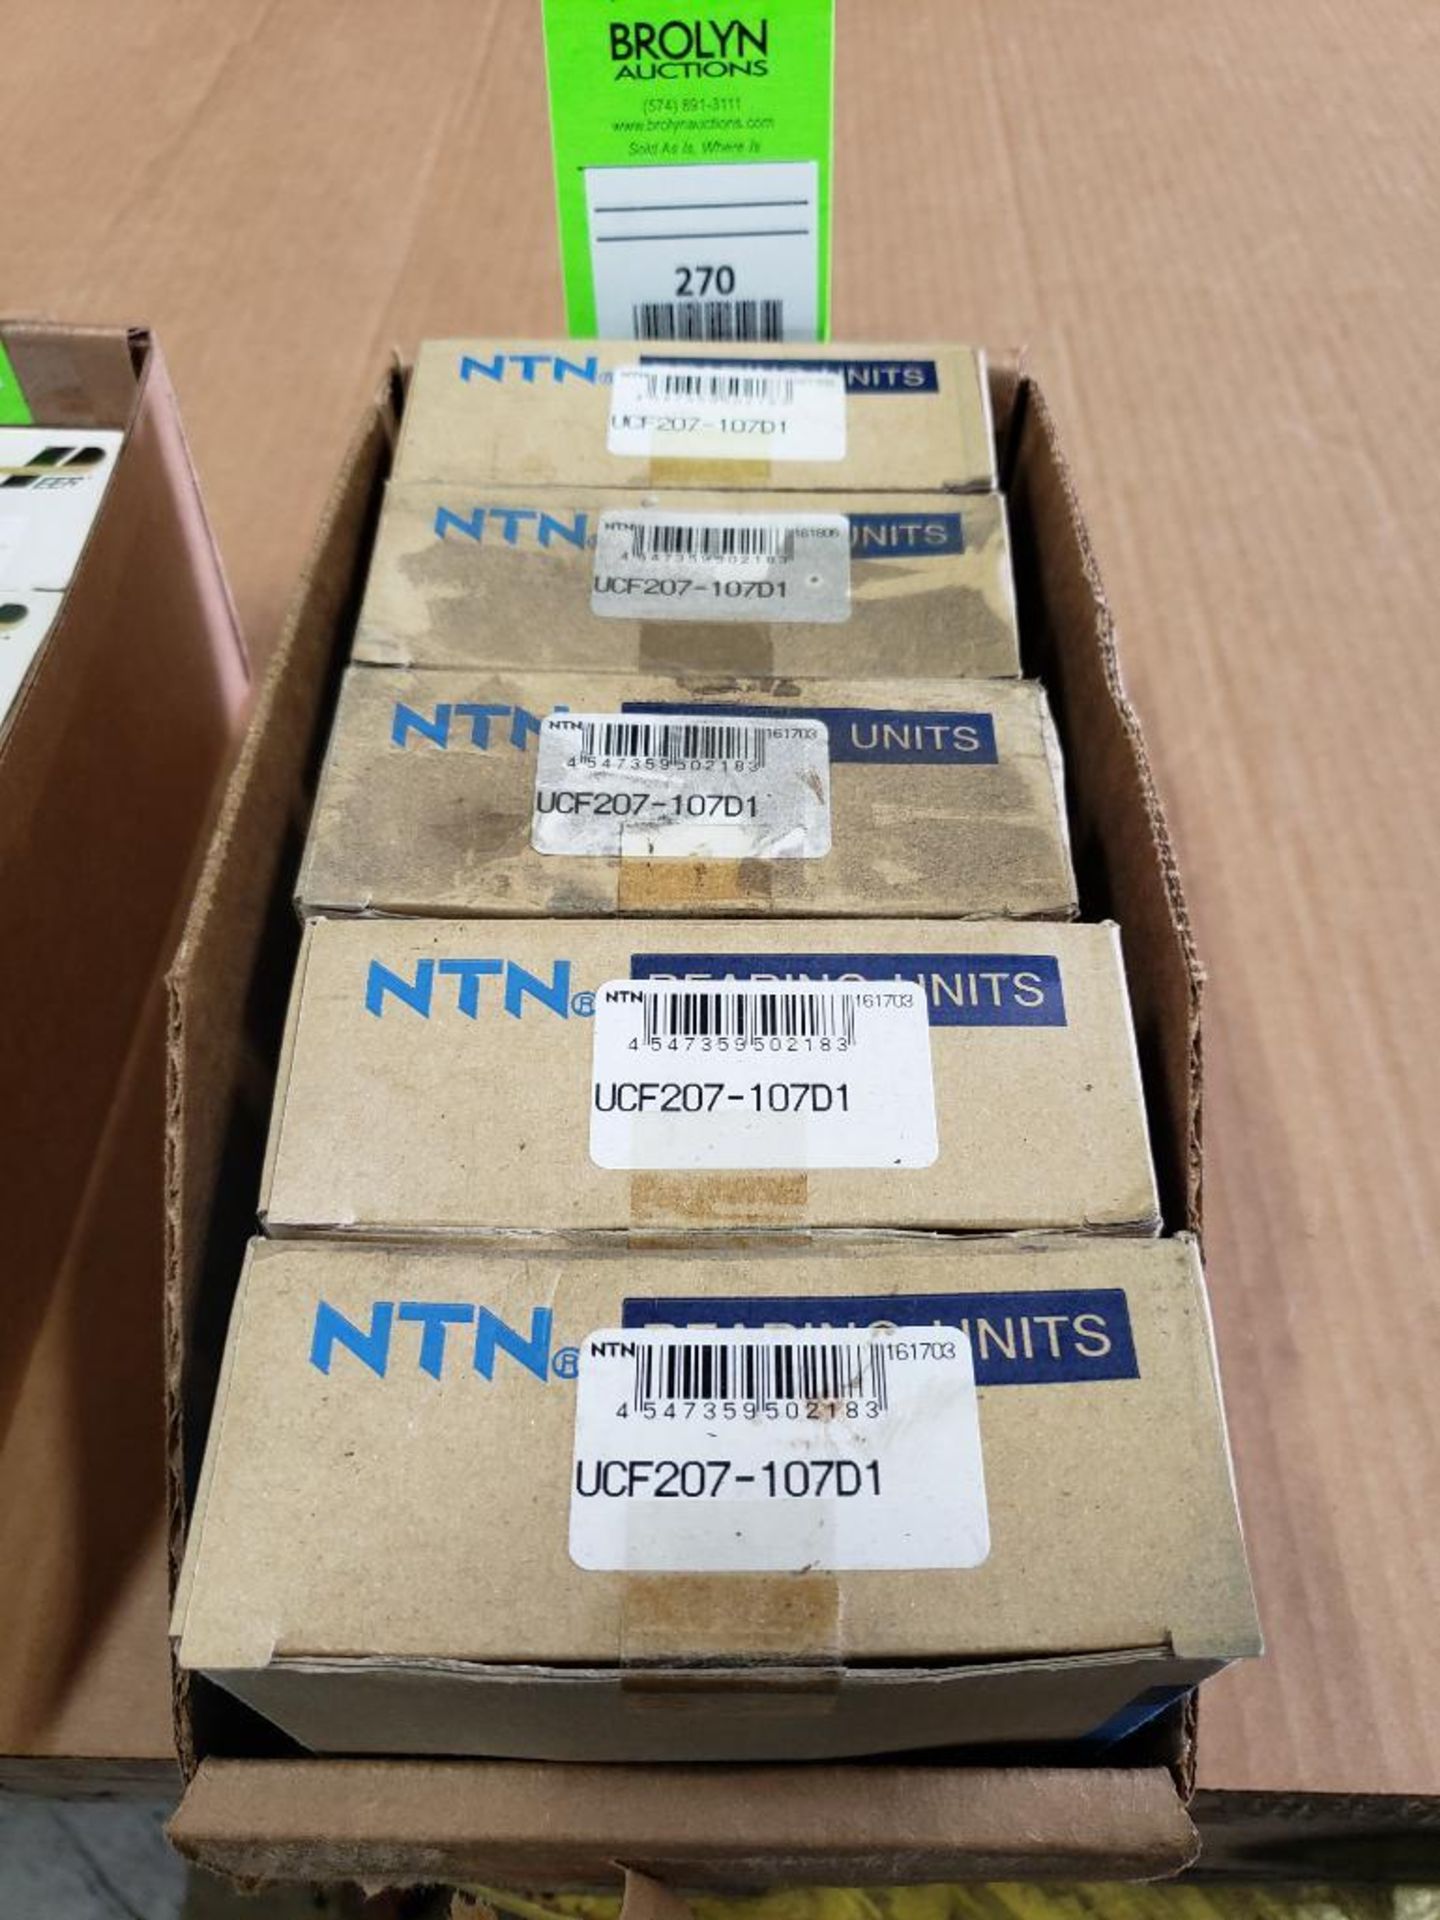 Qty 5 - NTN bearings. Part number UCF207-10701. New in box.